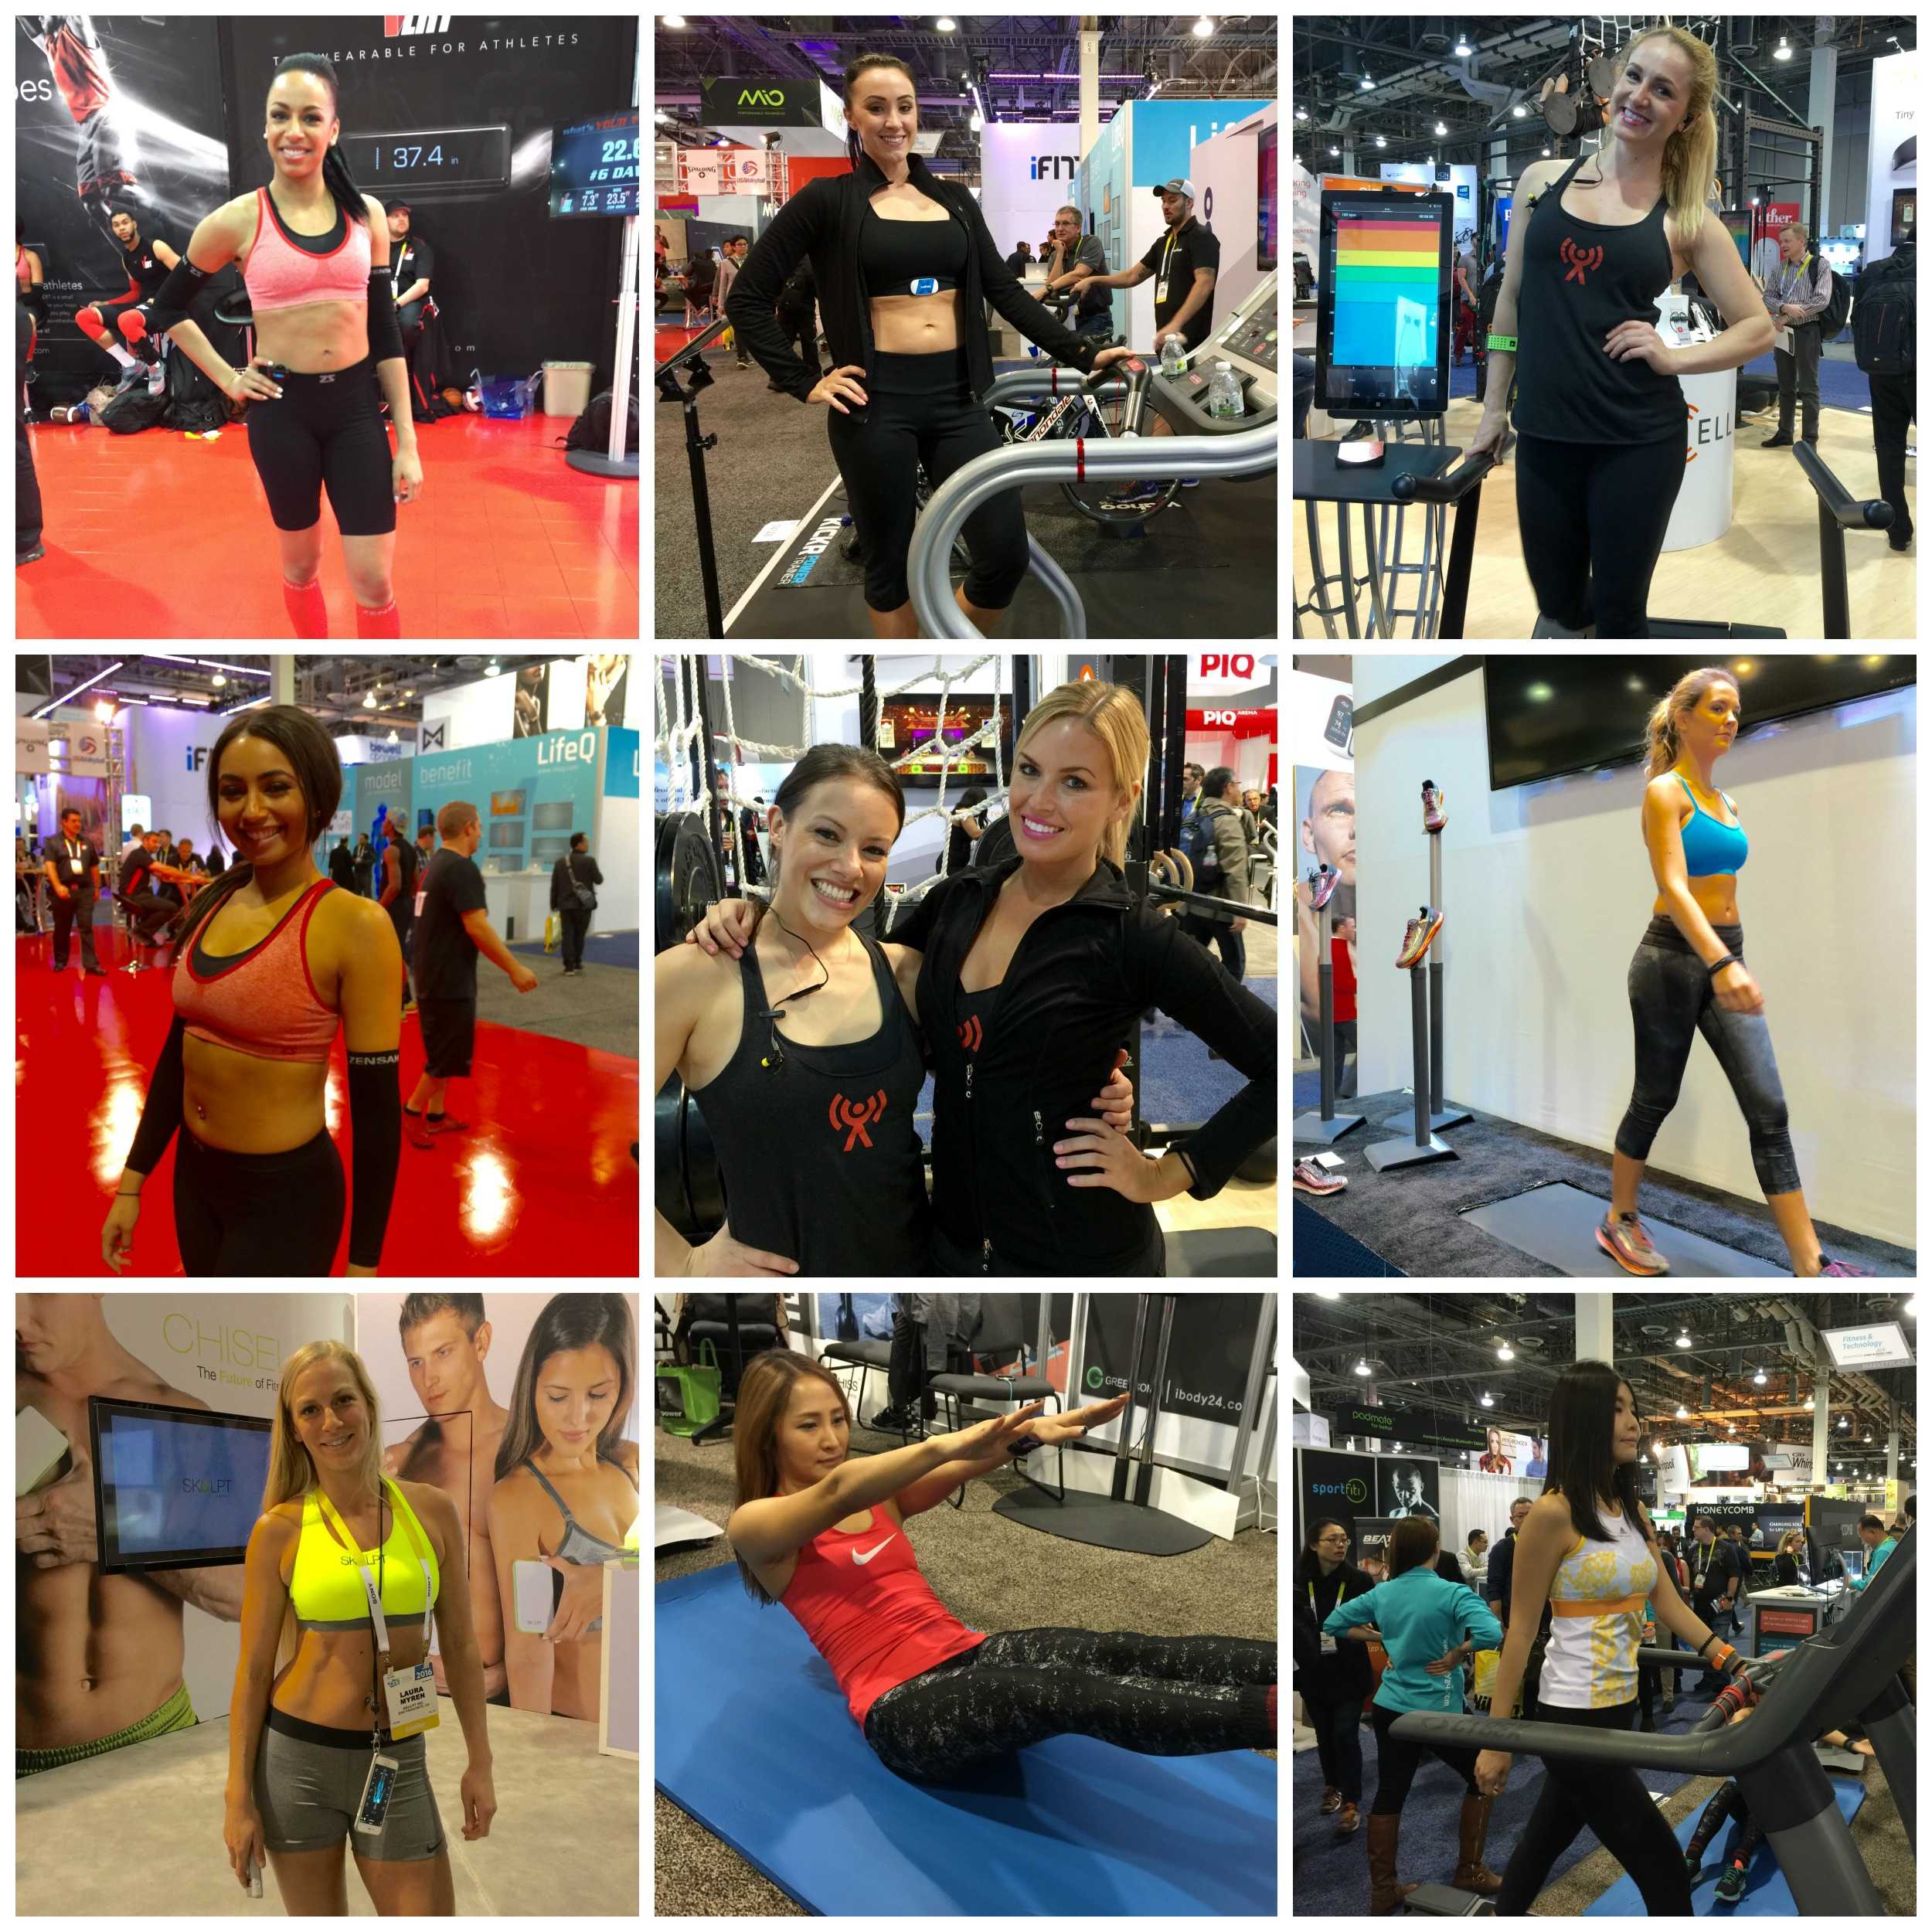 There were quite a lot of fitness models at CES this year wearing sports bras instead of pasties.